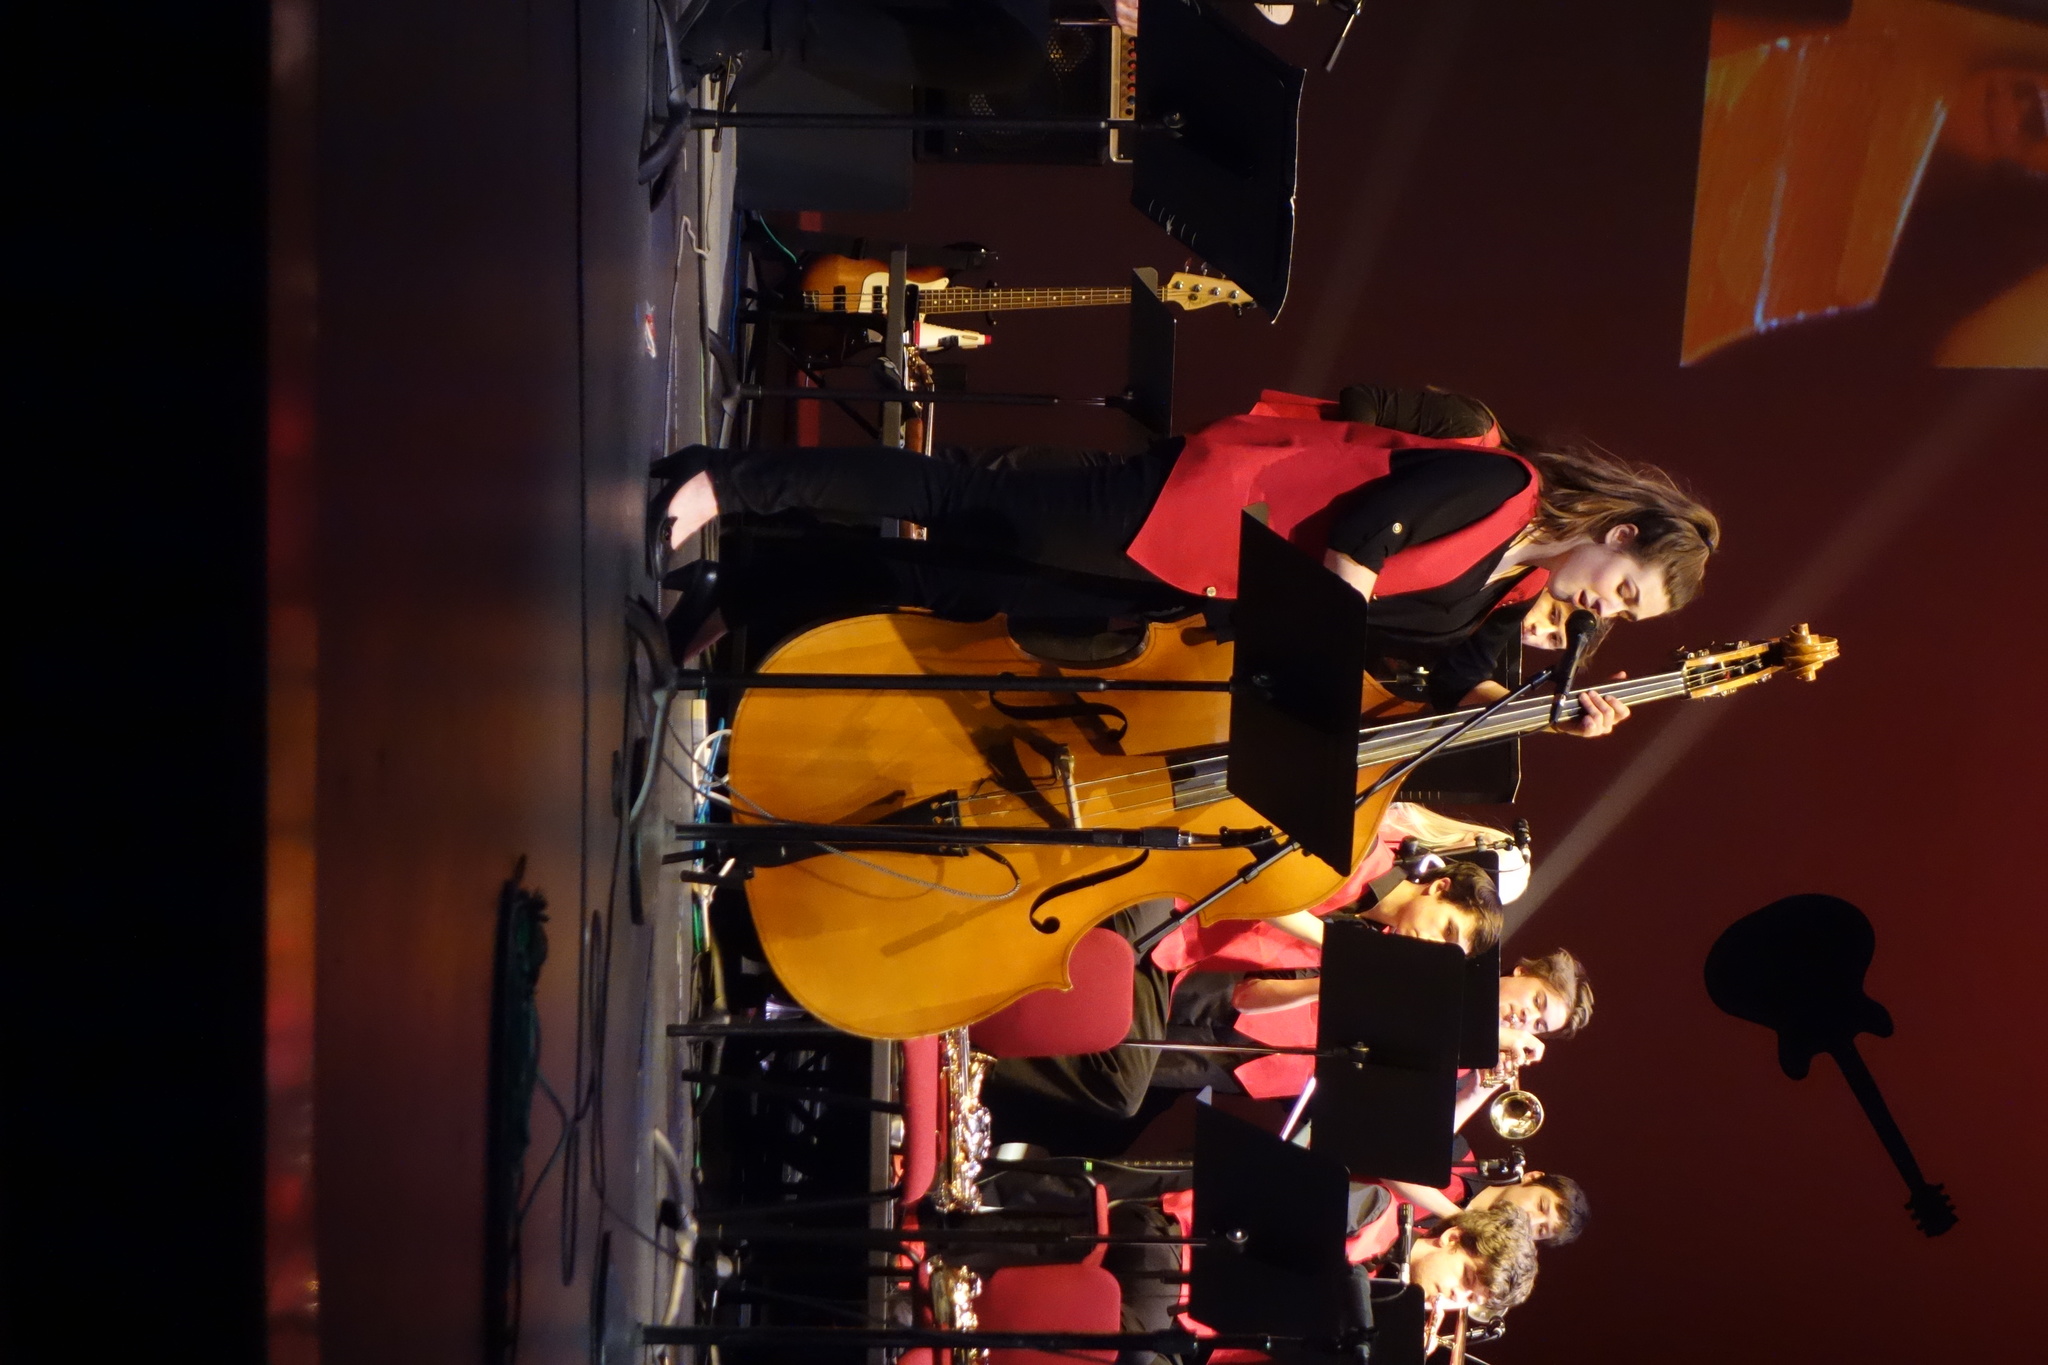 Juneau-Douglas High School students sings “Stormy Weather” as she plays the bass at the Sitka Jazz Festival (Clara Miller| Capital City Weekly).